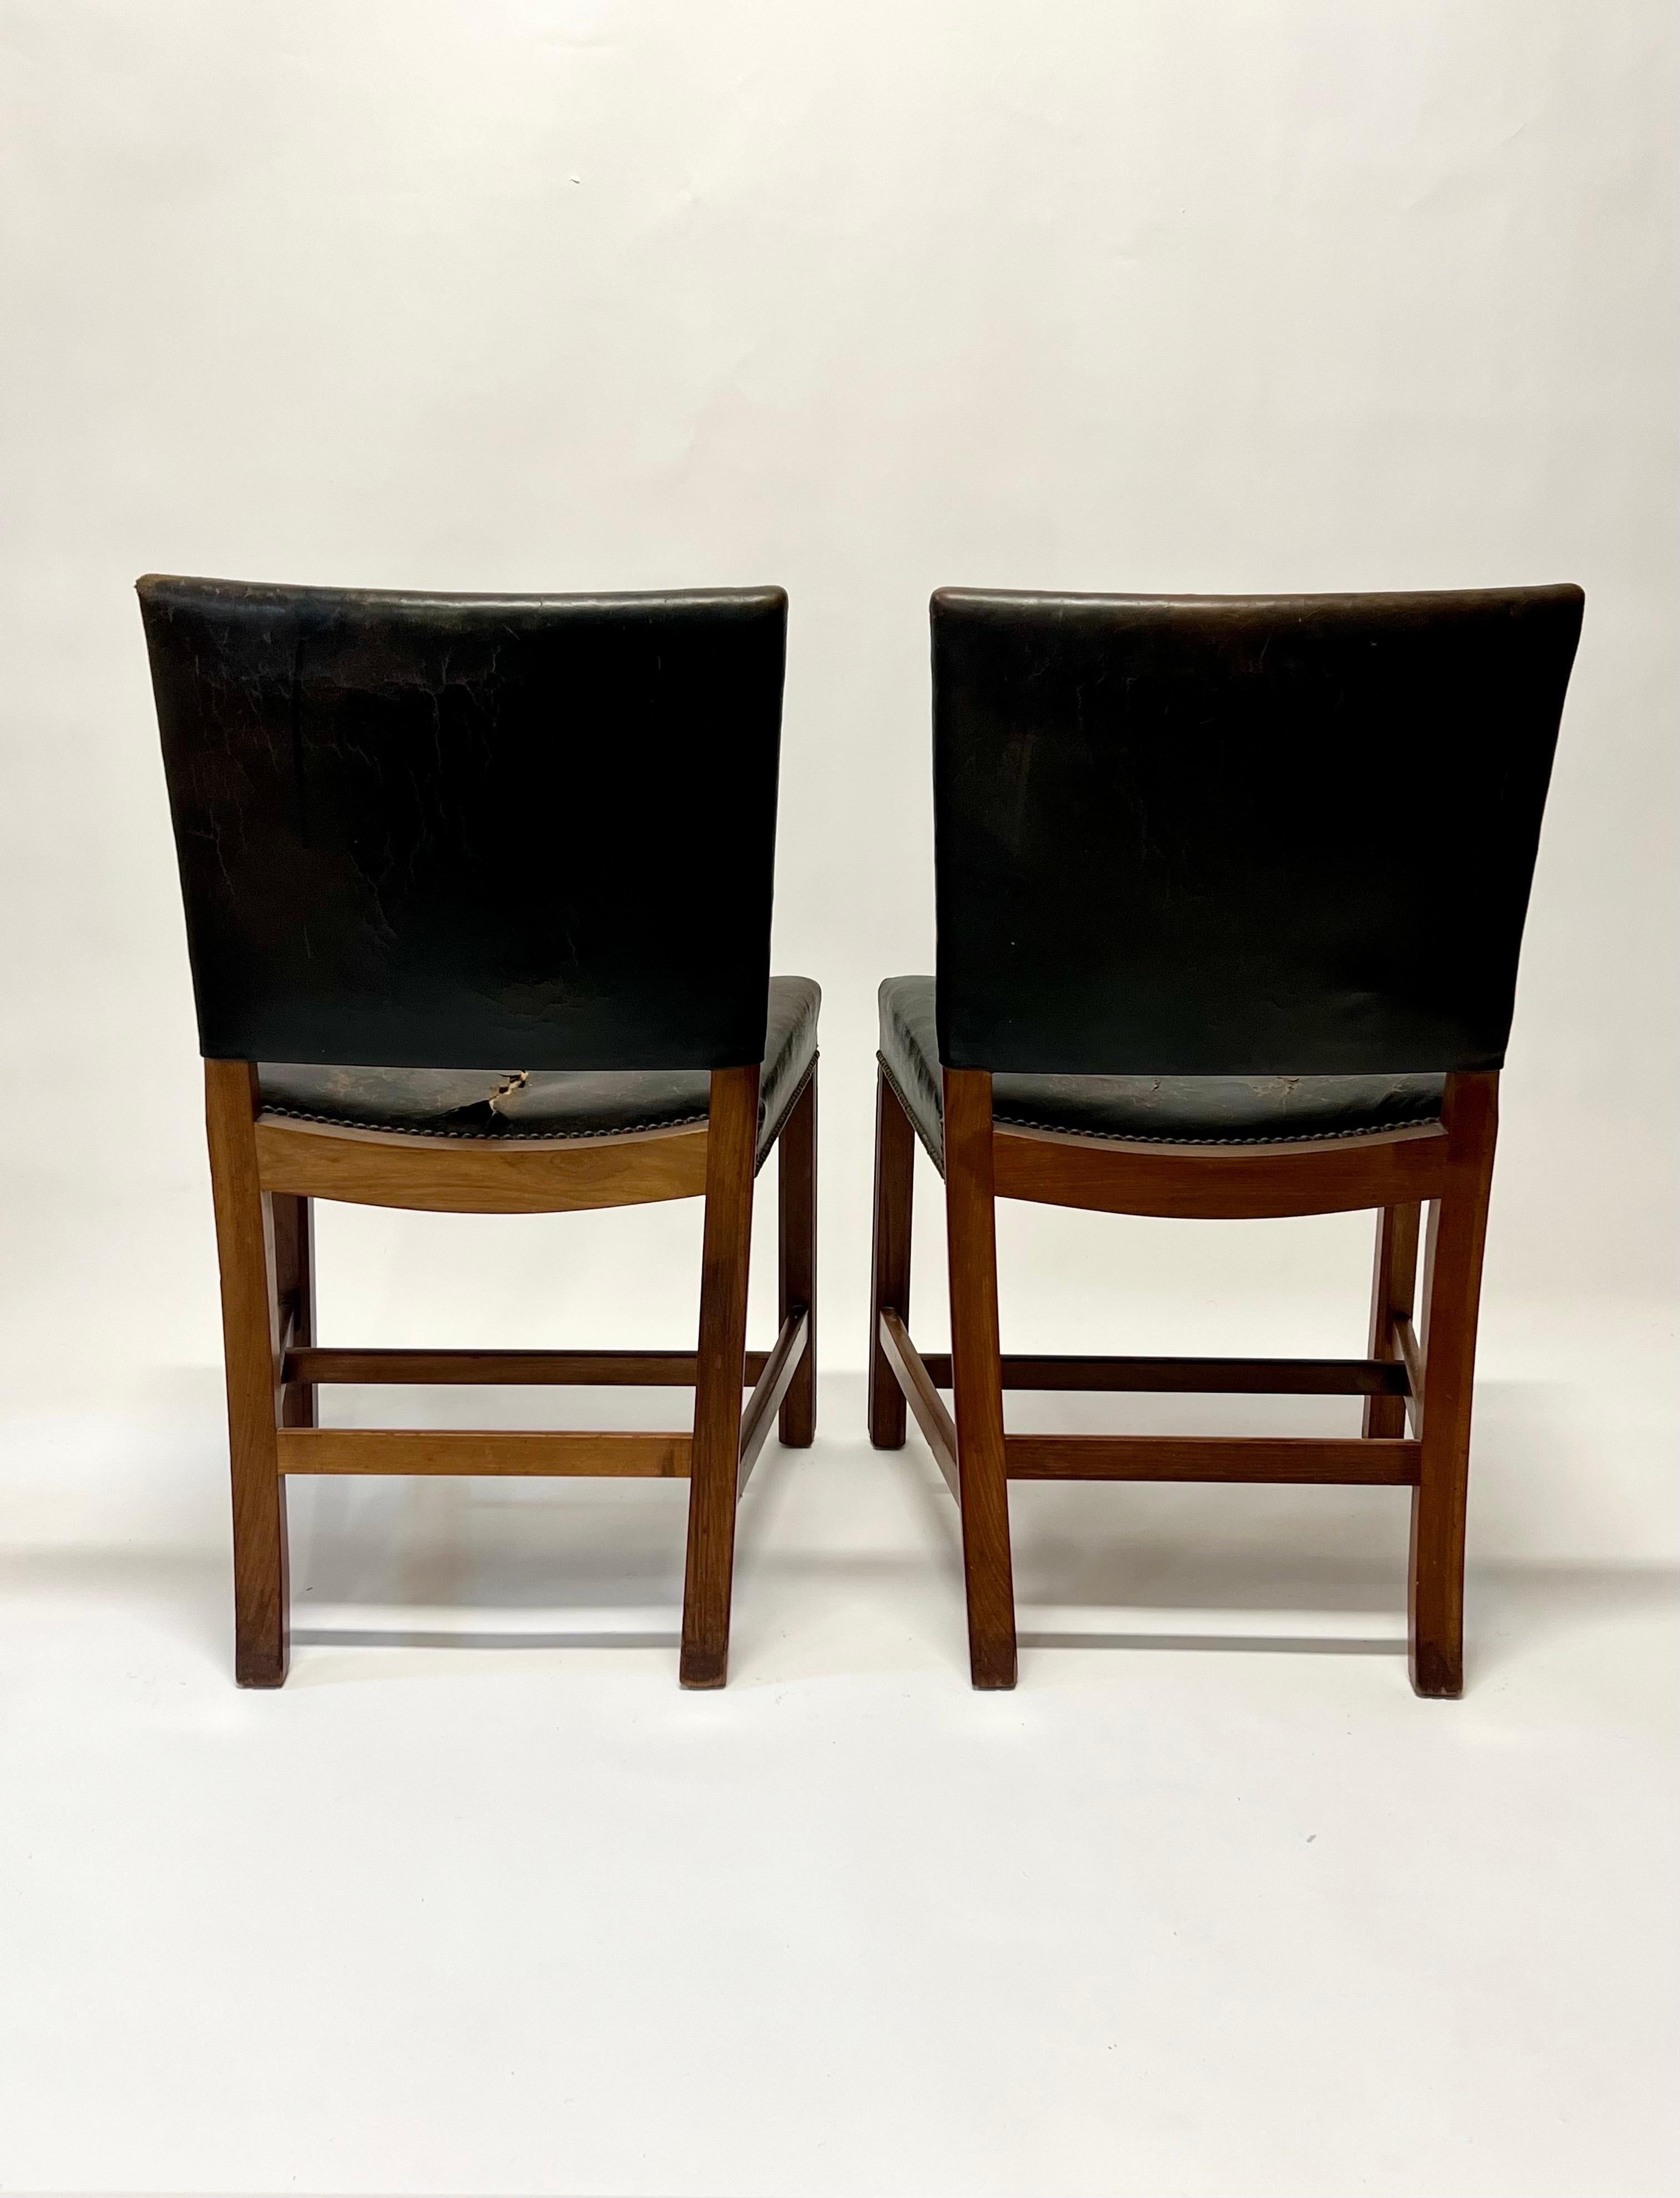 Leather Early Kaare Klint Red Chairs in Cuban Mahogany, circa 1930s For Sale